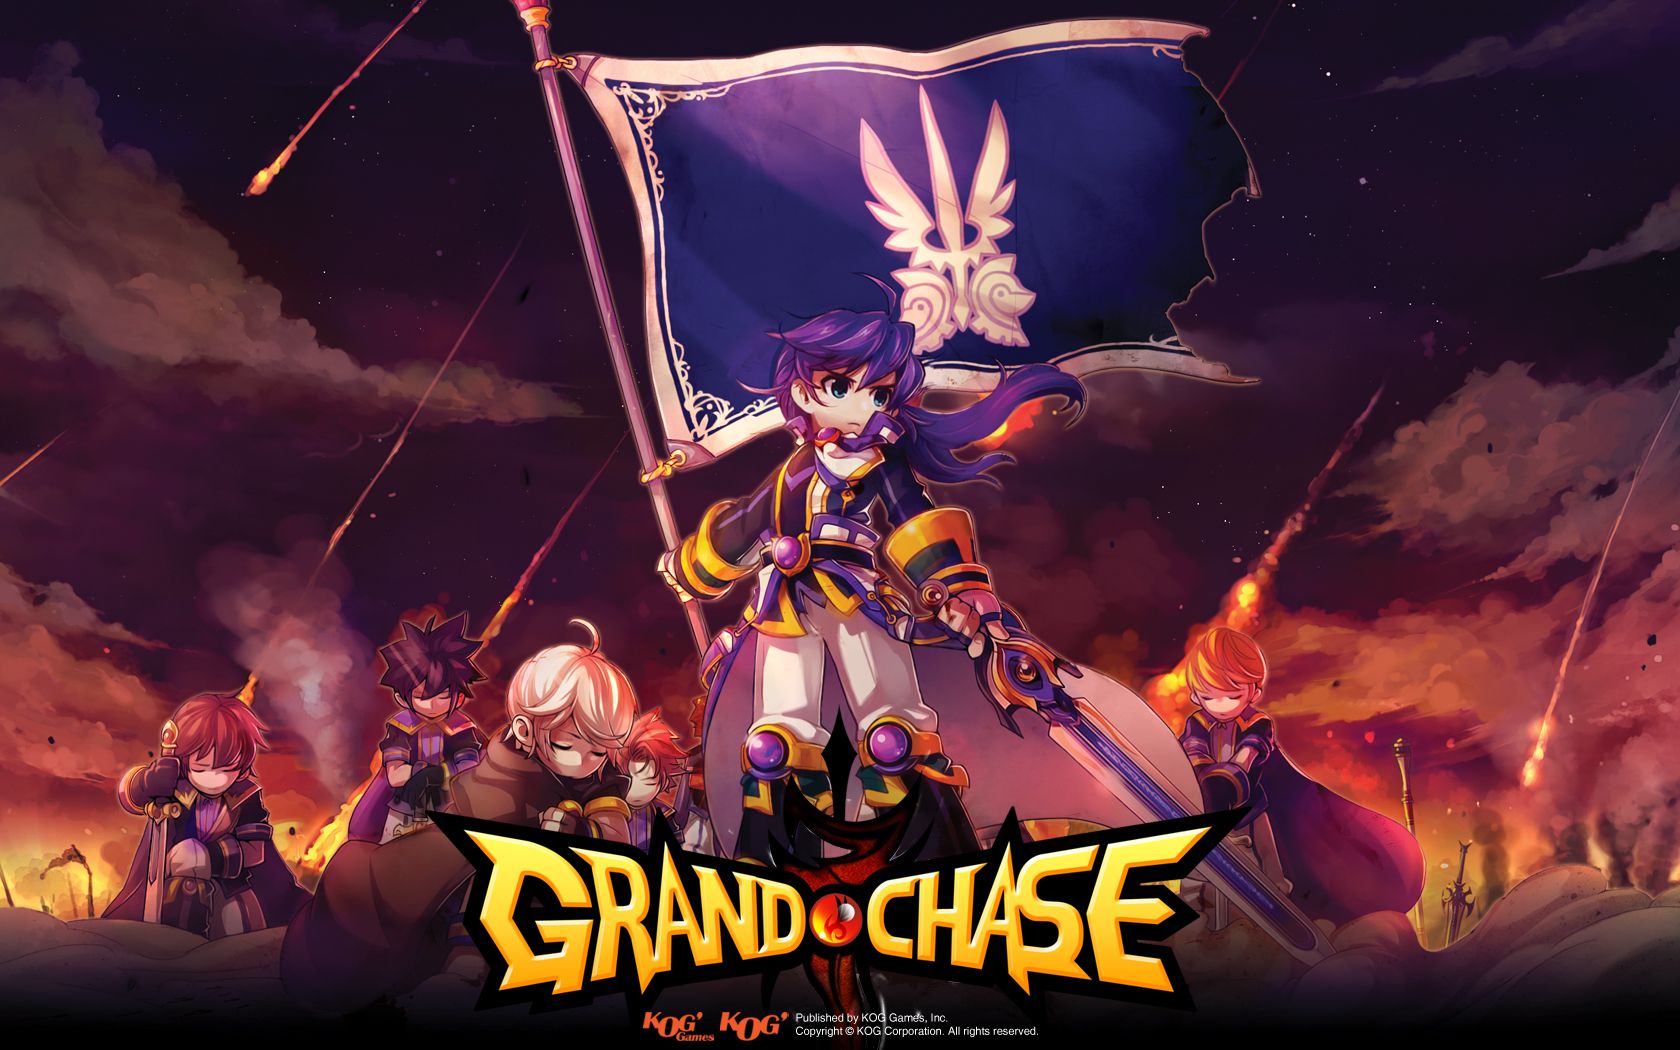 Grand Chase Shutting Down Looking To Migrate Players